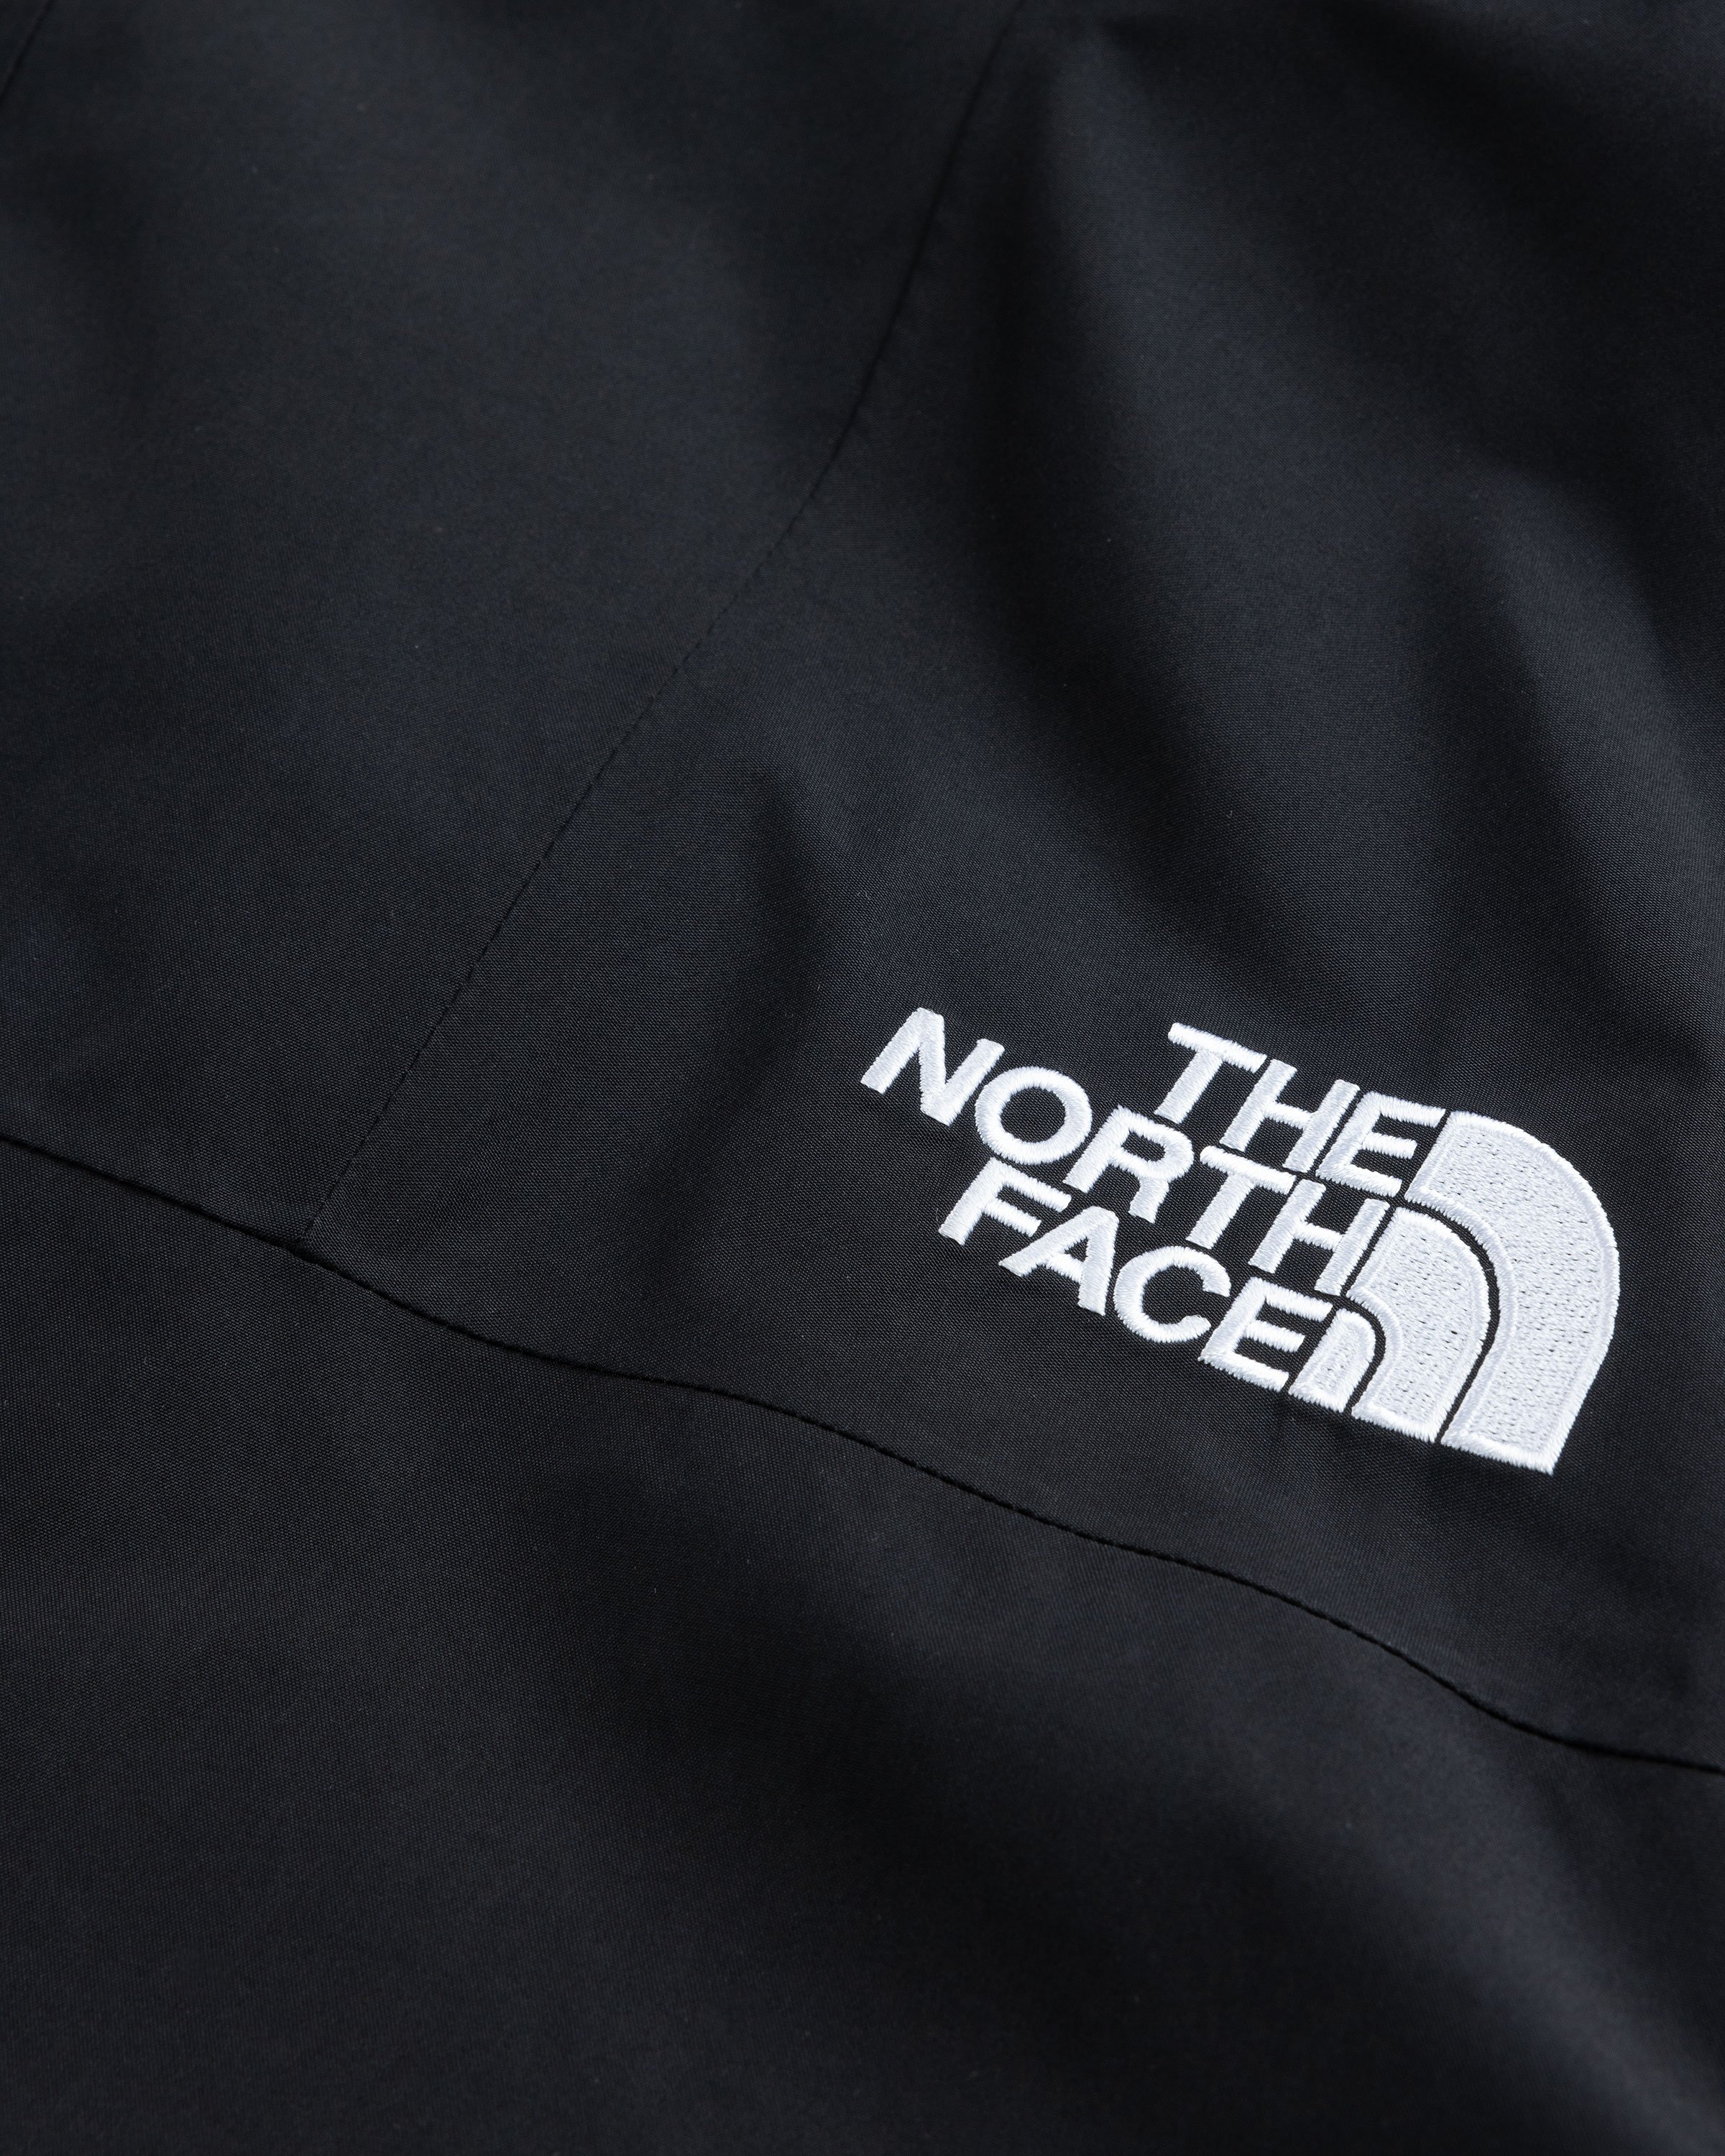 The North Face - Gore-Tex Mountain Jacket Black - Clothing - Black - Image 7